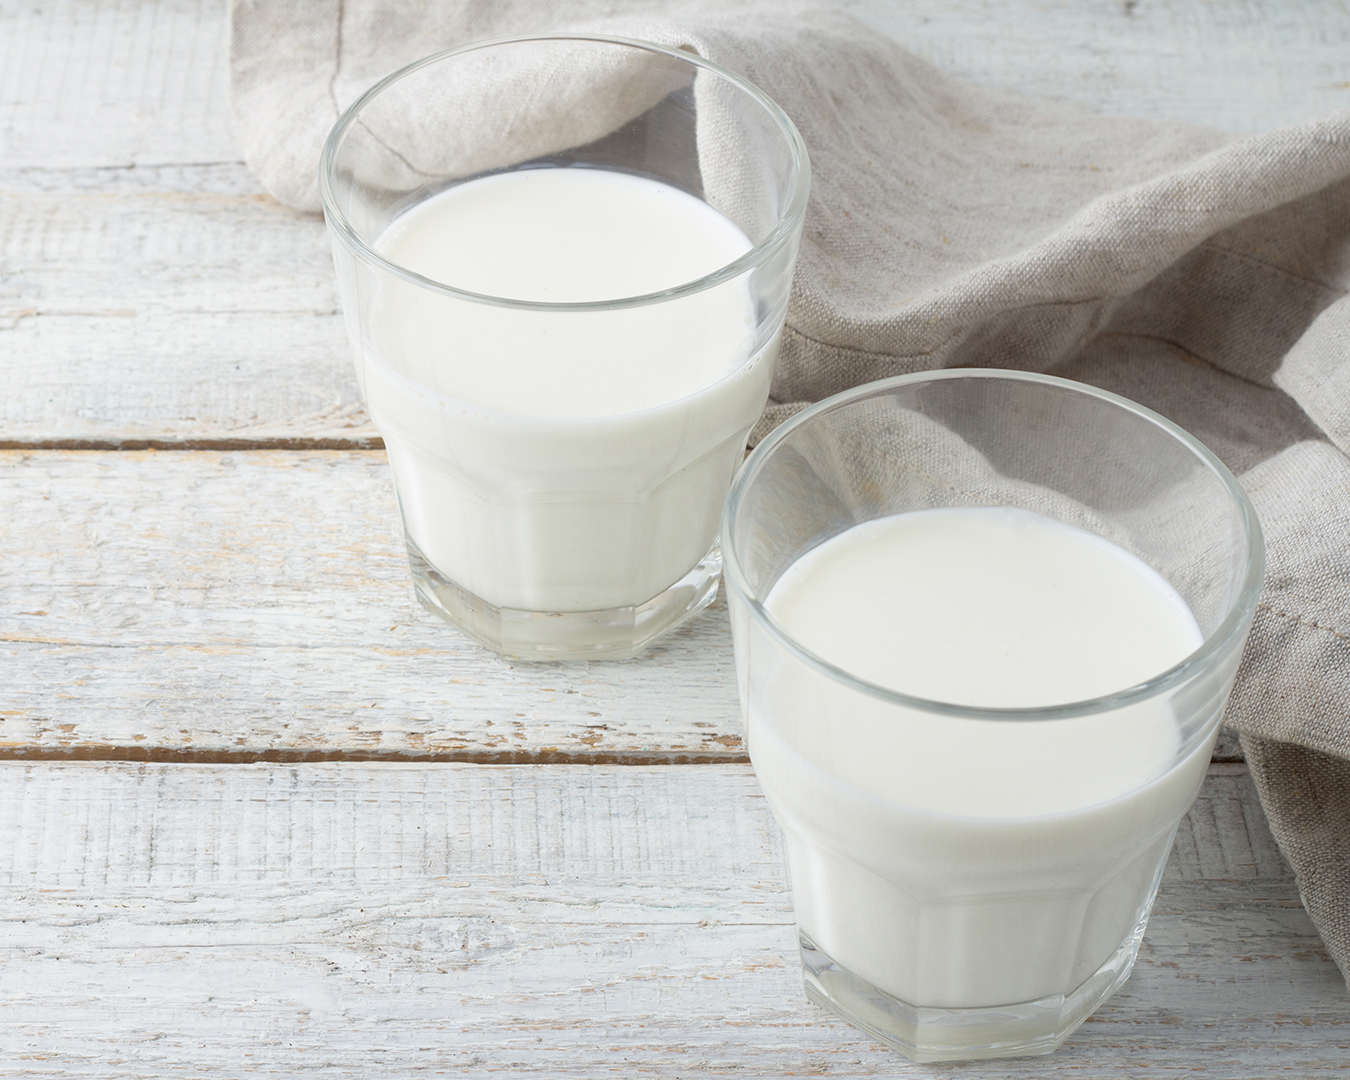 Glass,Of,Milk,On,Wooden,Background